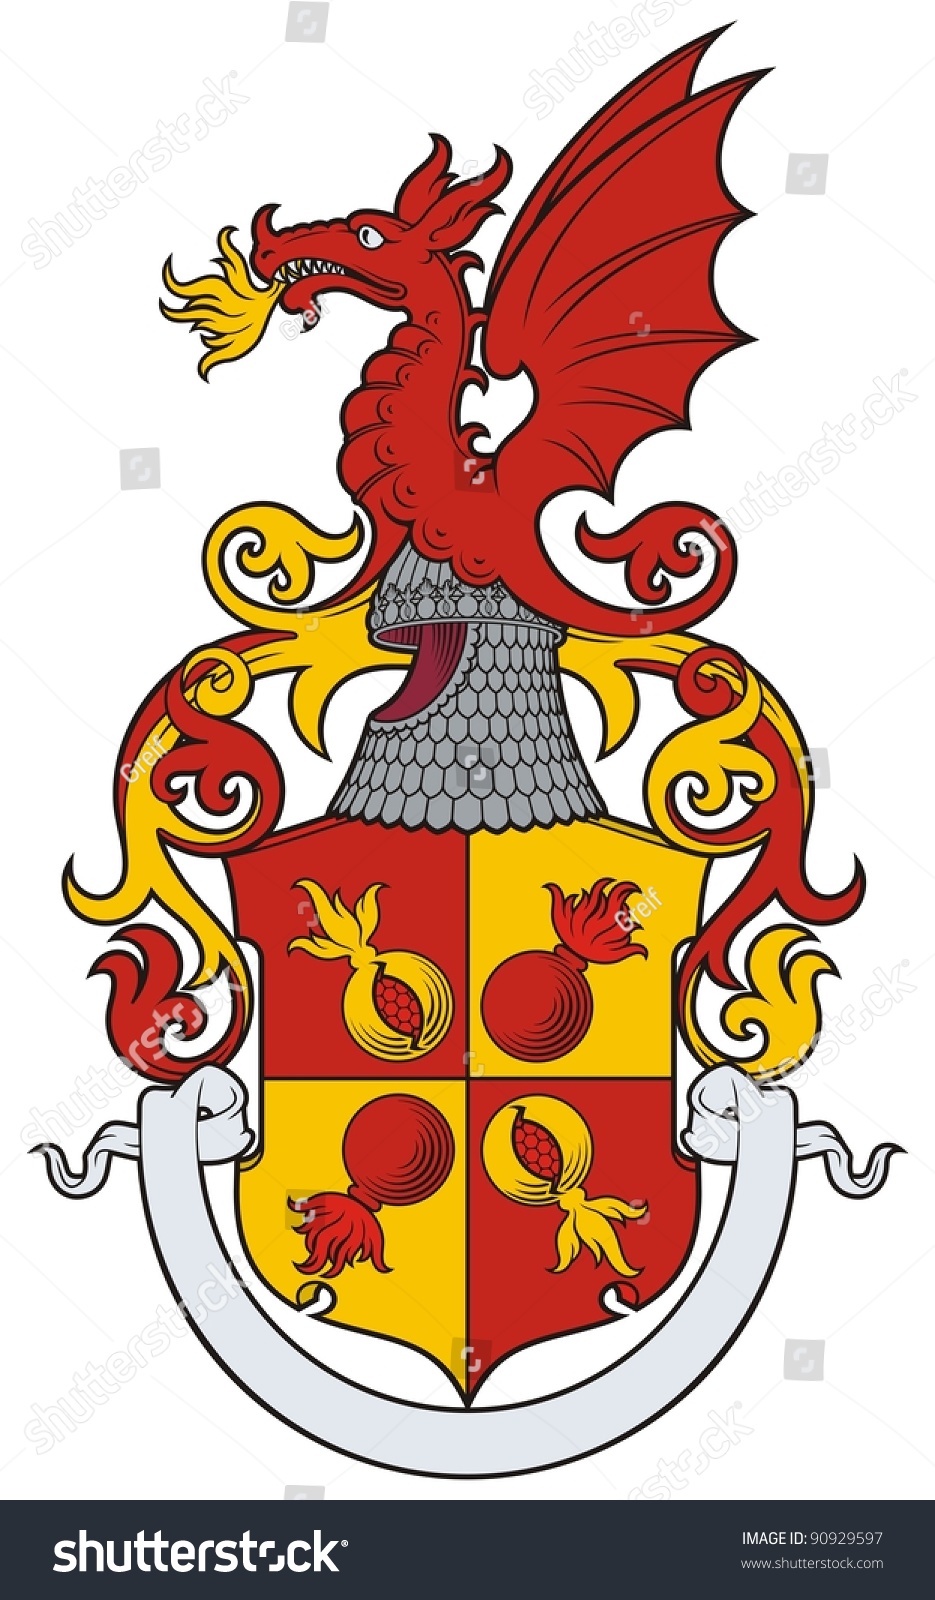 The Arms With A Grenade, A Pomegranate And A Dragon In Crest. Heraldic ...